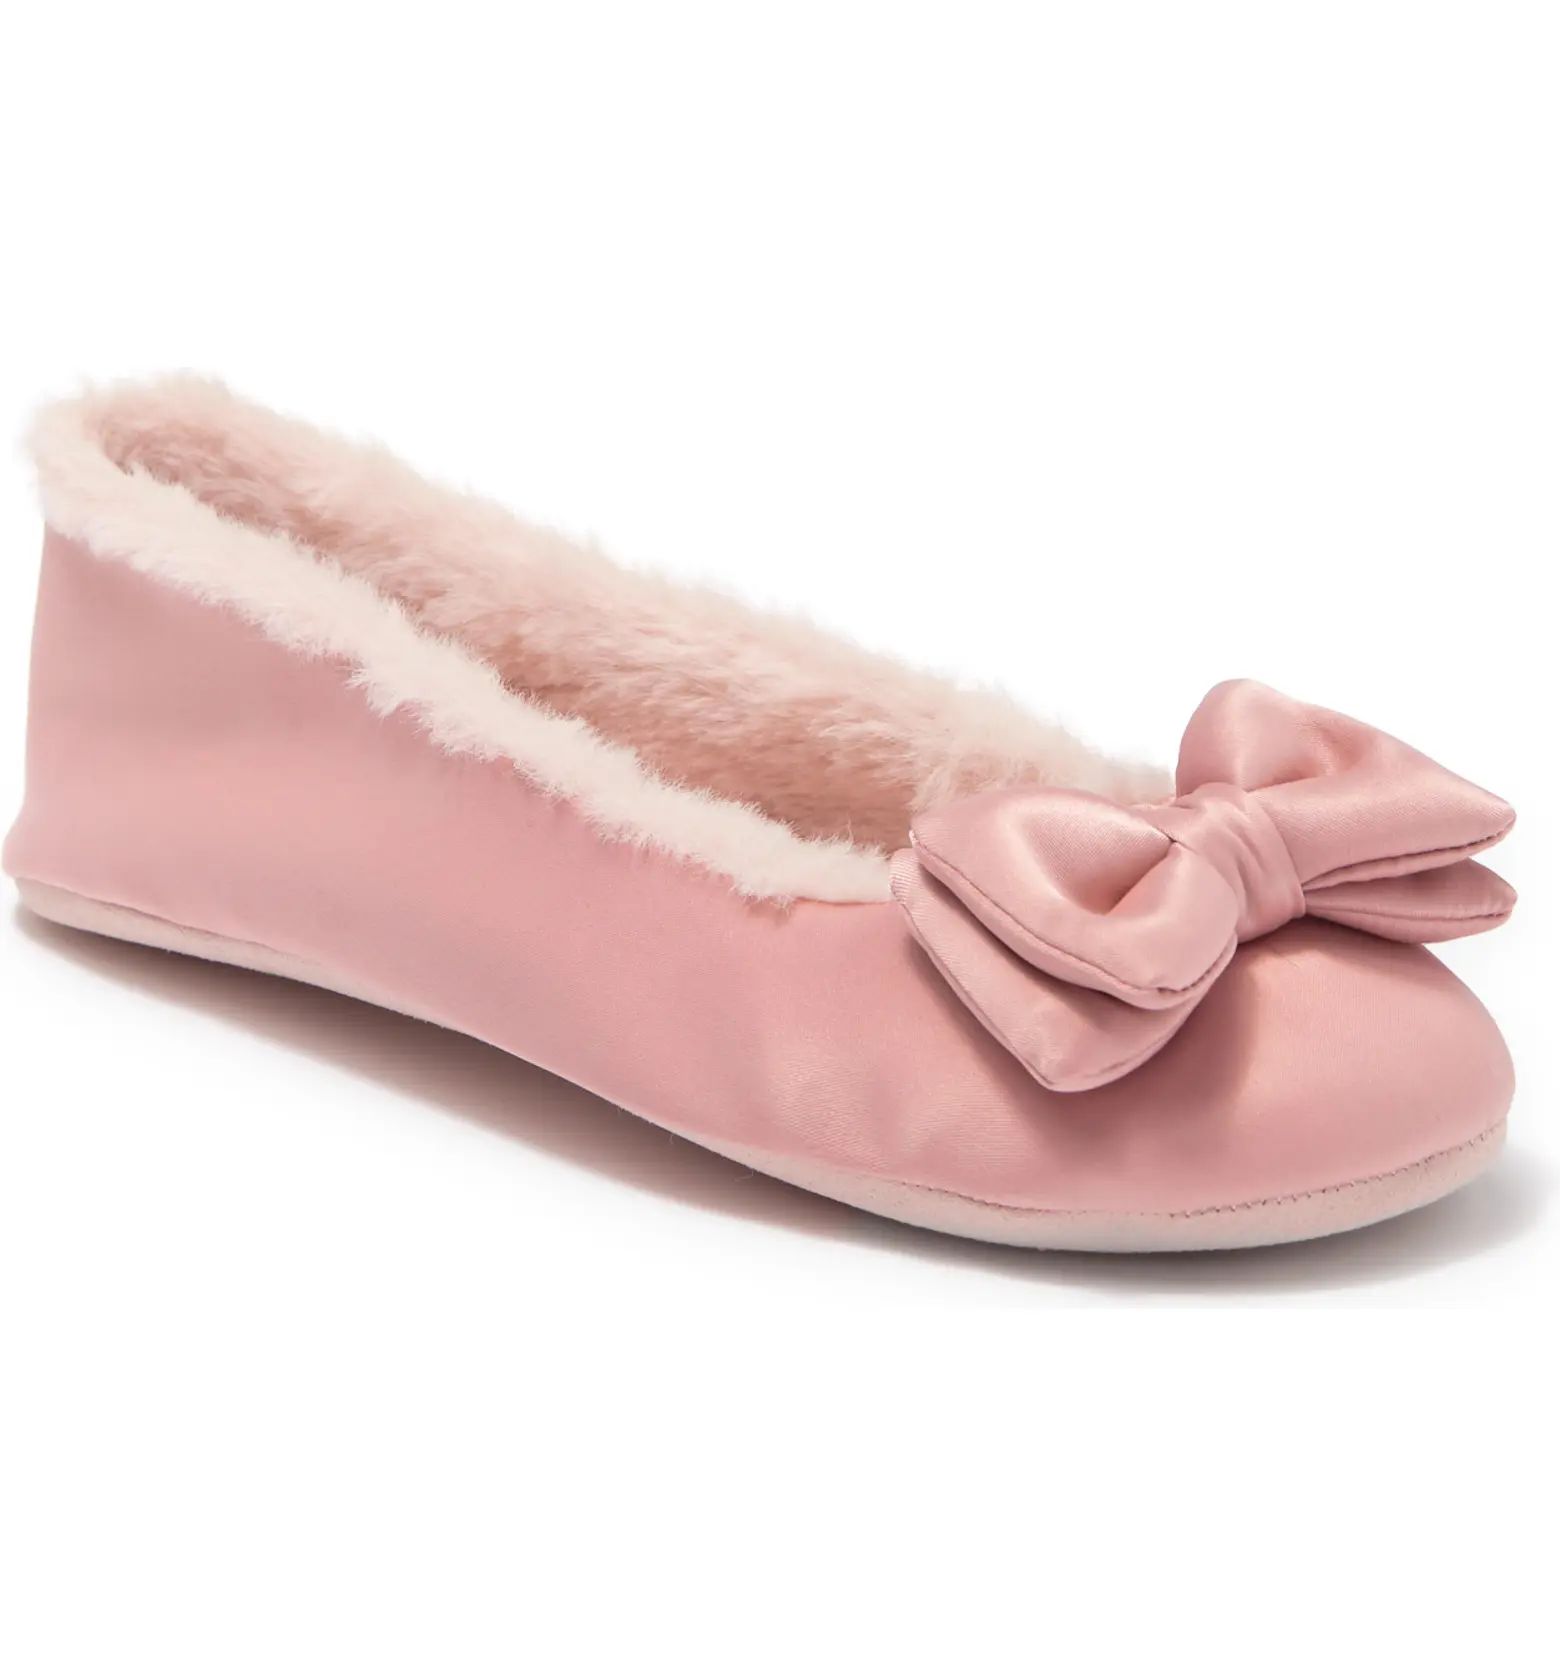 mallow faux shearling lined slipper | Nordstrom Rack